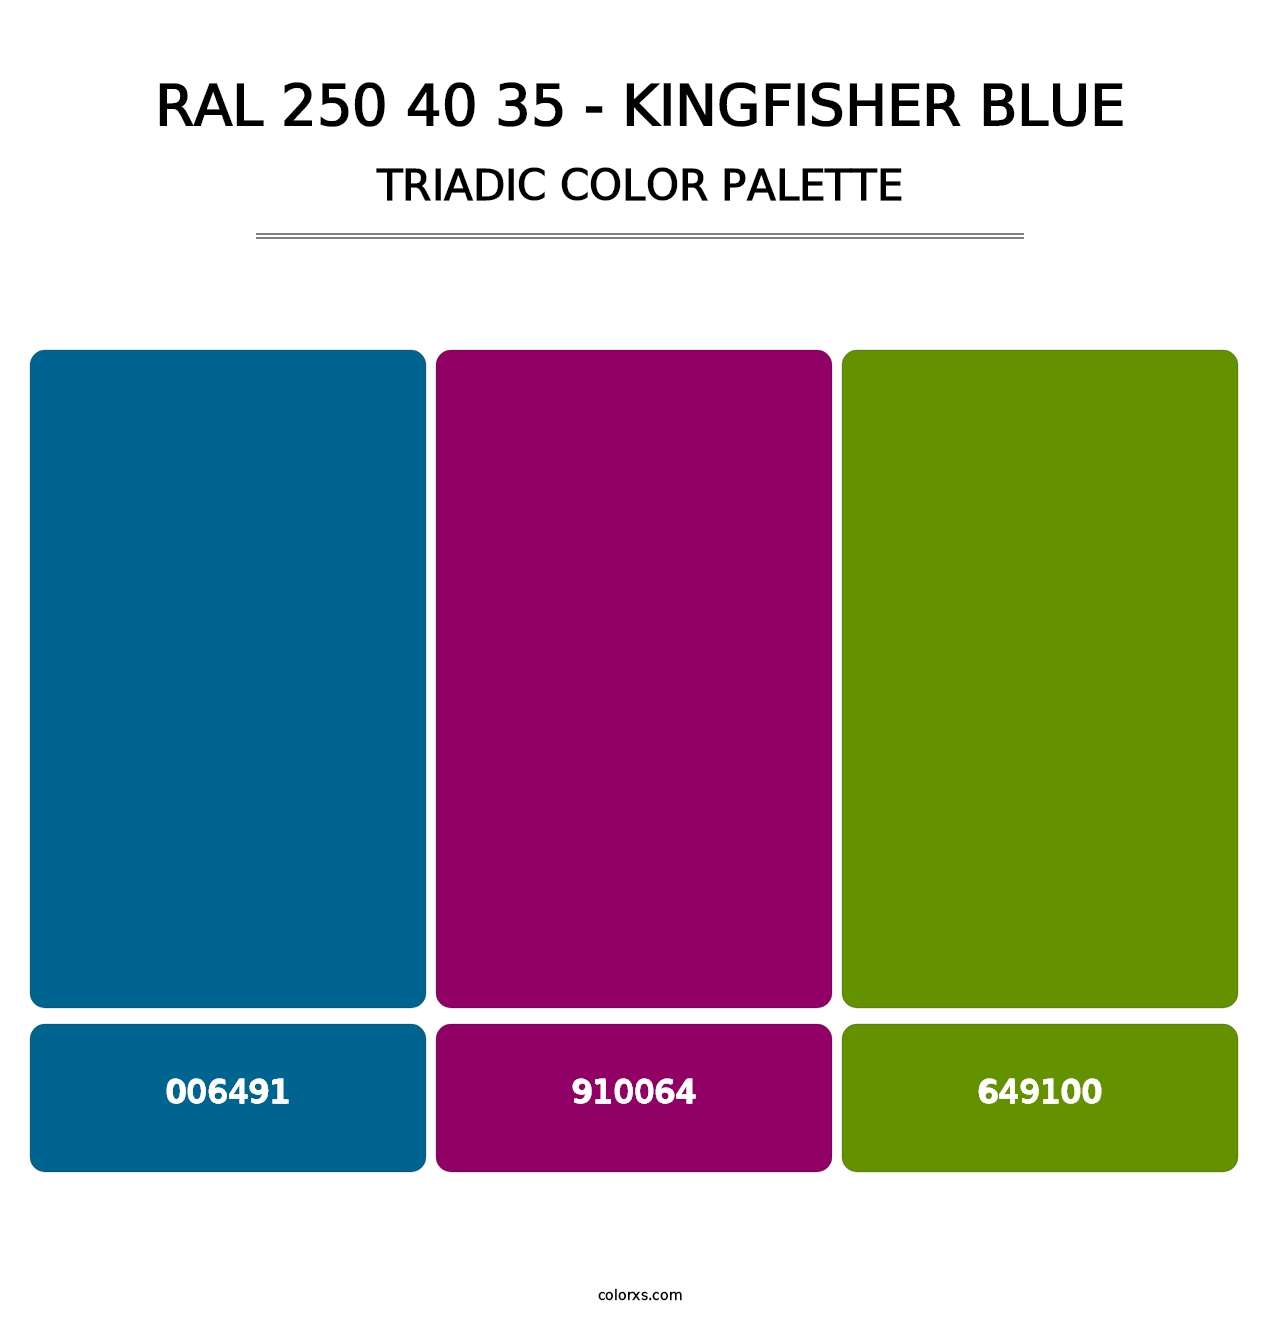 RAL 250 40 35 - Kingfisher Blue - Triadic Color Palette